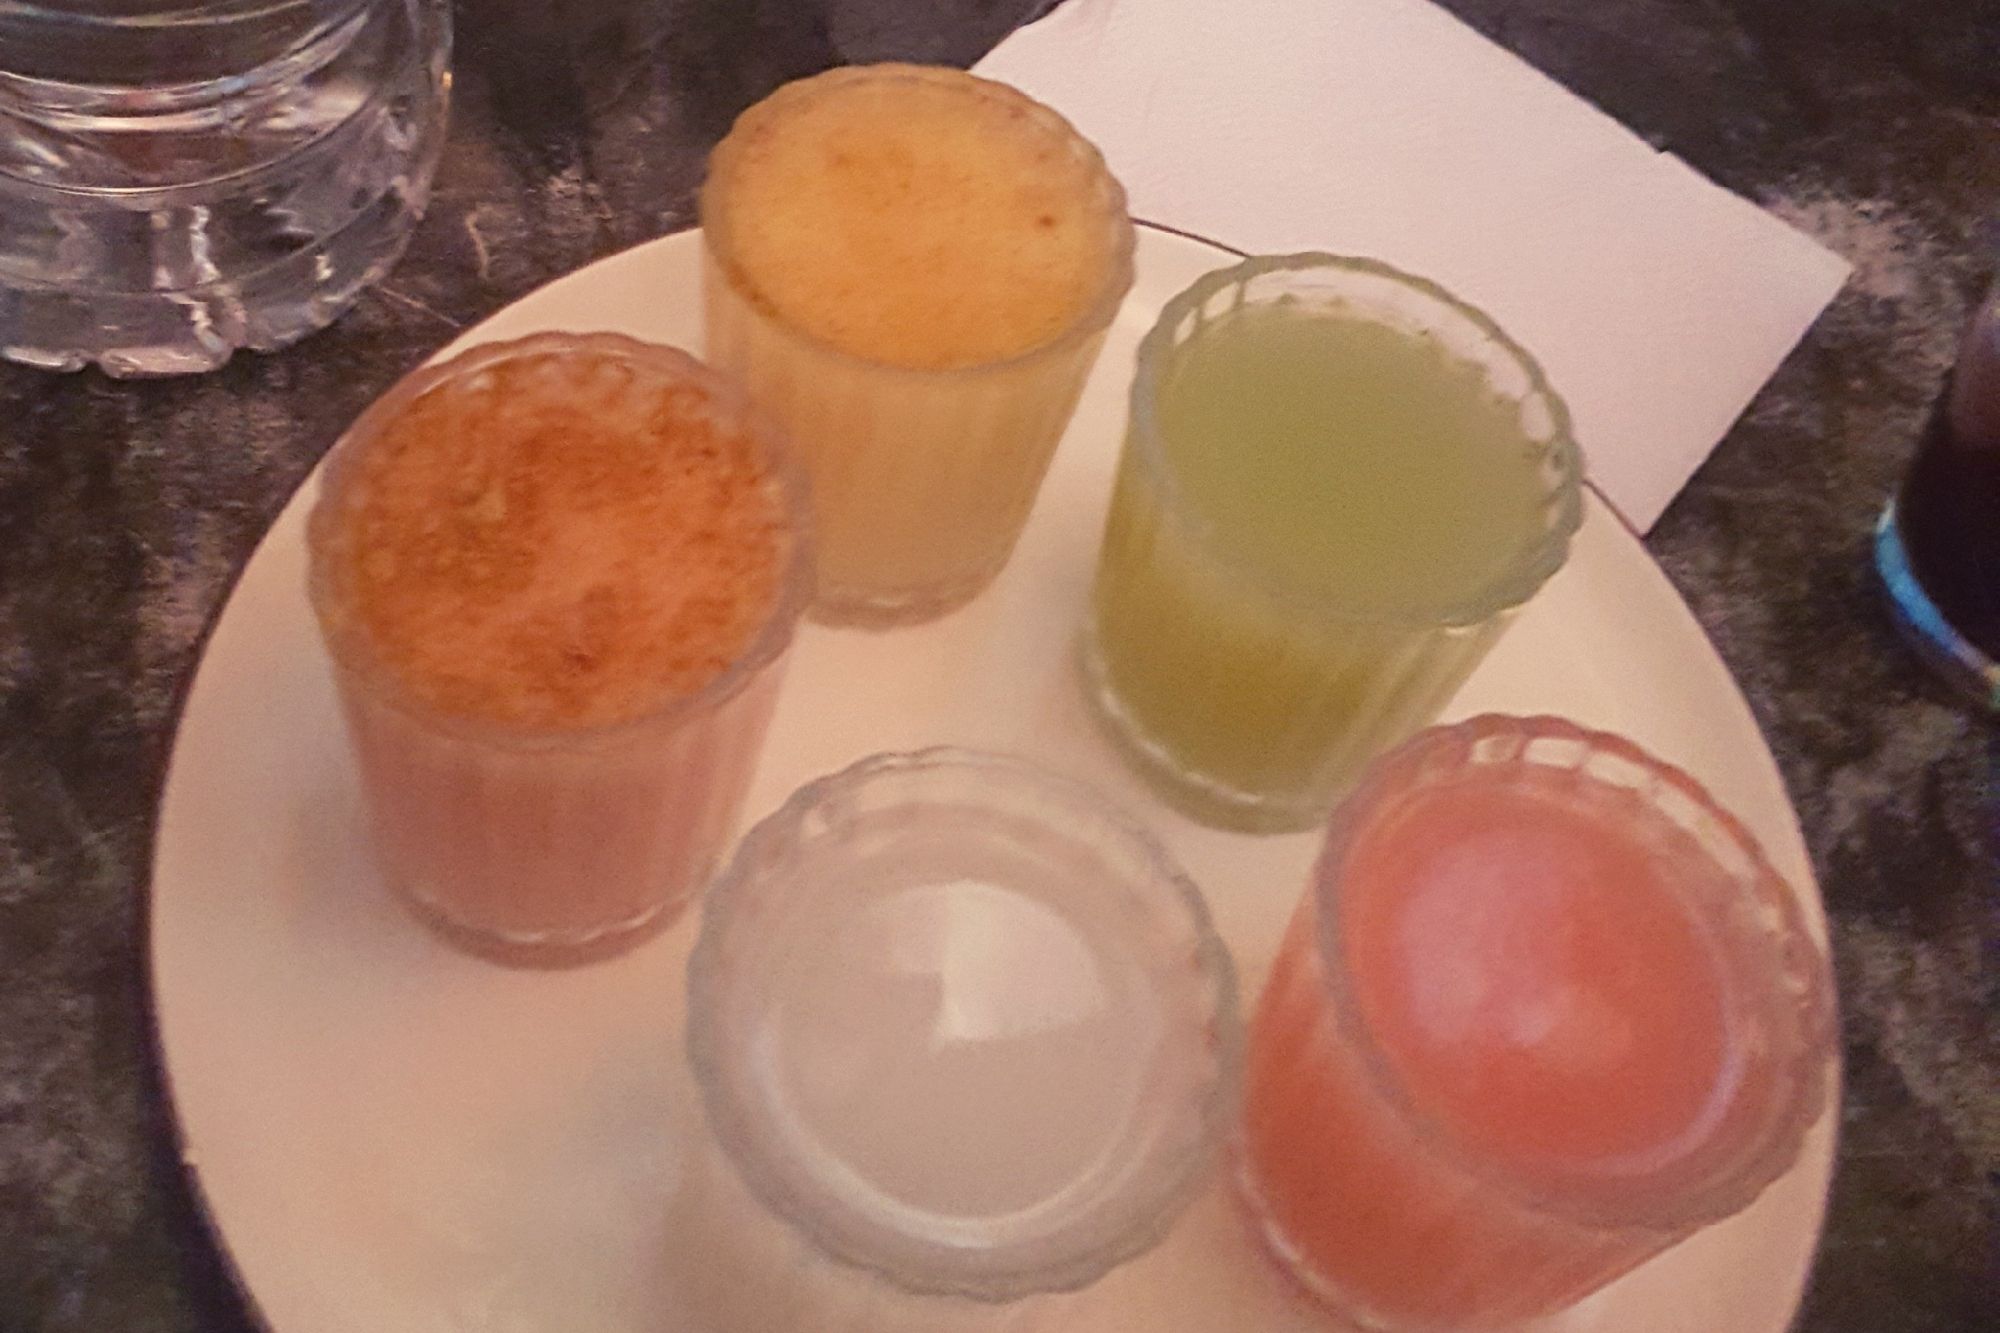 Sampler of brightly colored pulque beverages in small glasses